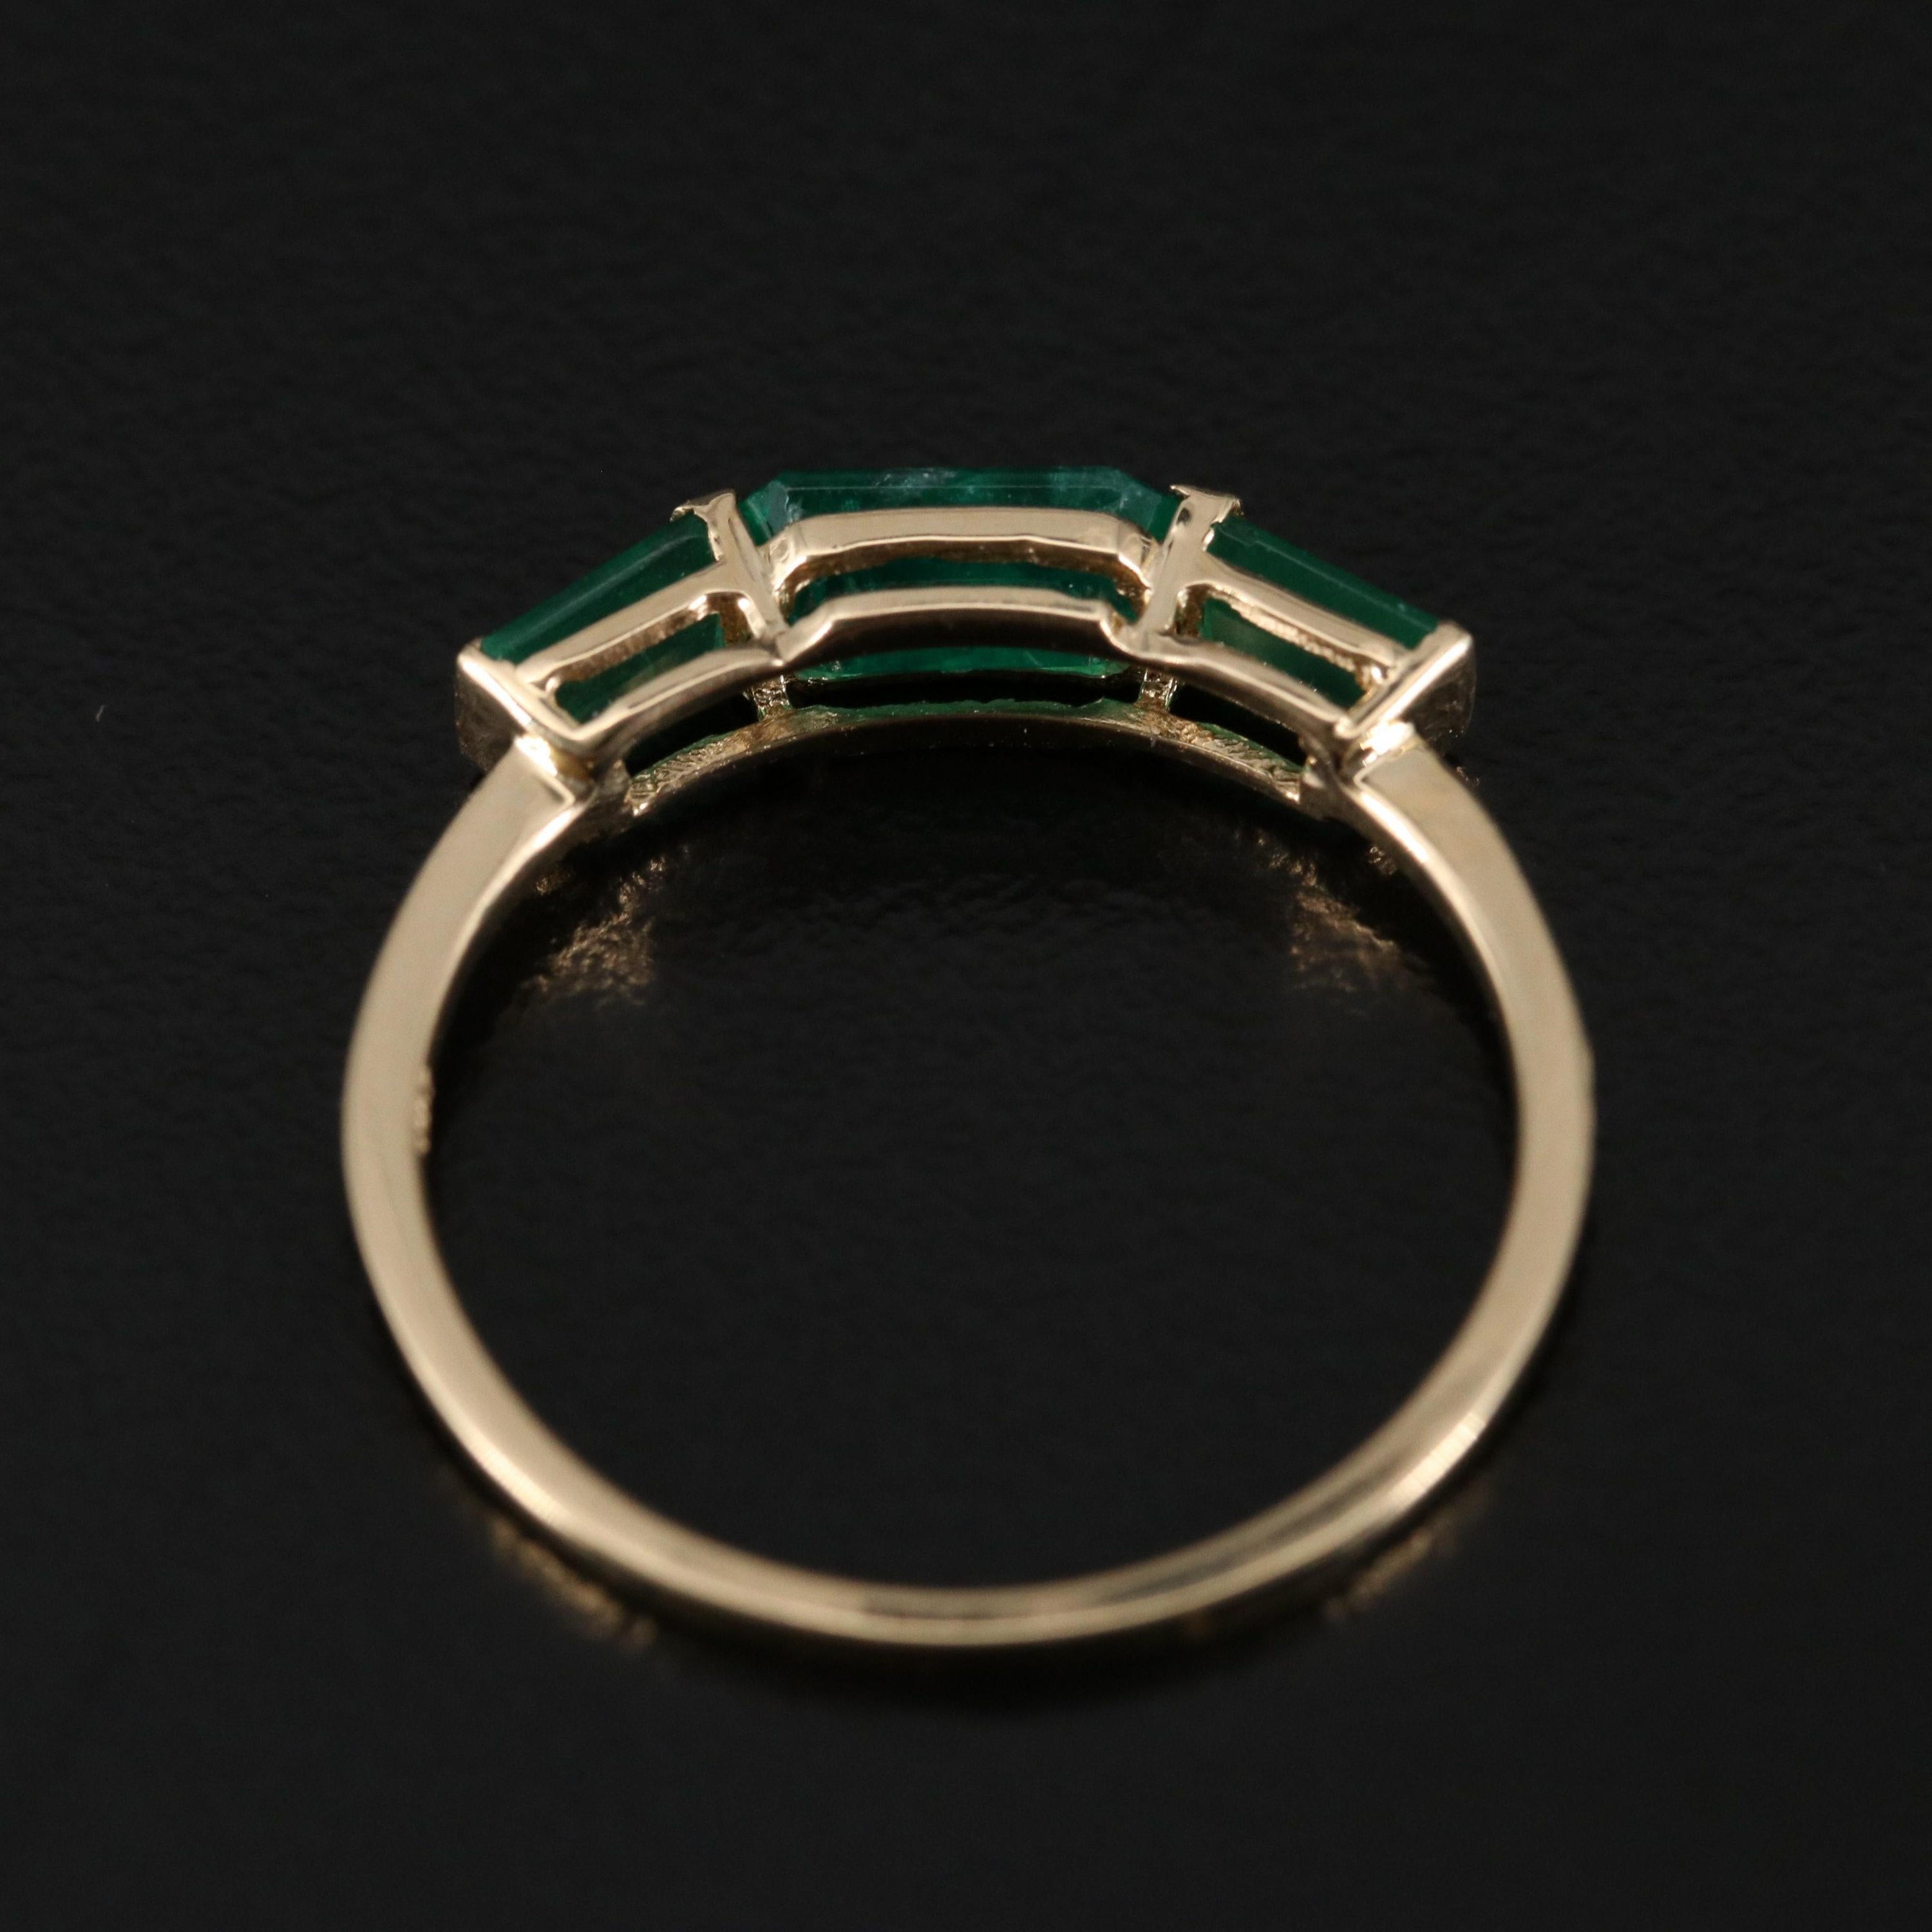 For Sale:  18K Gold 3 CT Natural Emerald Art Deco Style Engagement Ring, Fashion Band Rings 4